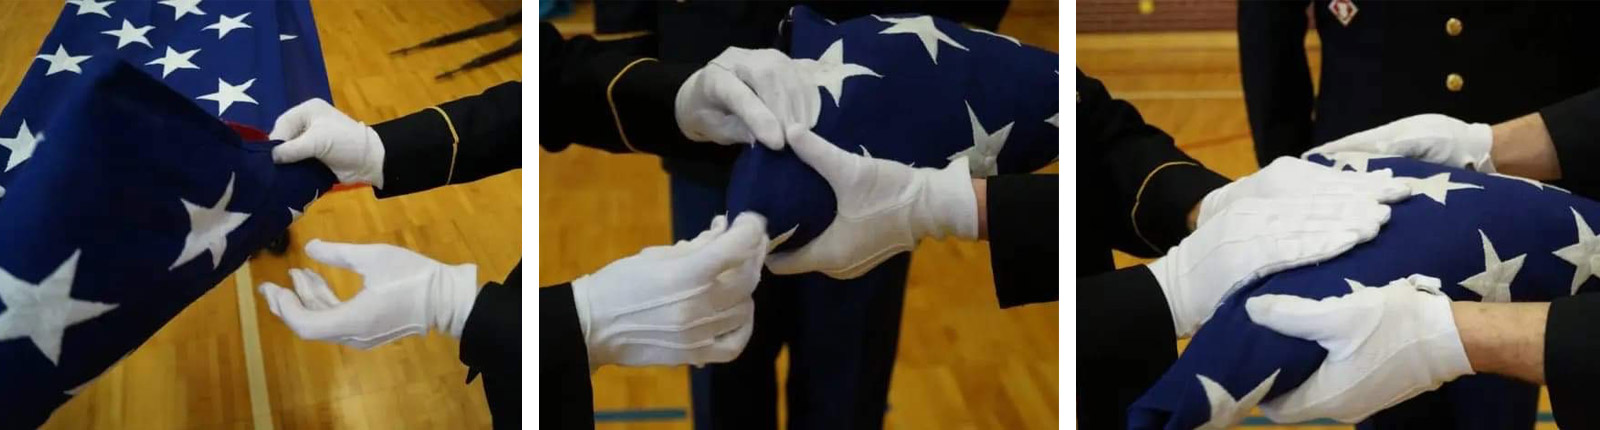 Image sequence of U.S. Army Honor Guard members folding an American flag for presenting to a soldier's next of kin.